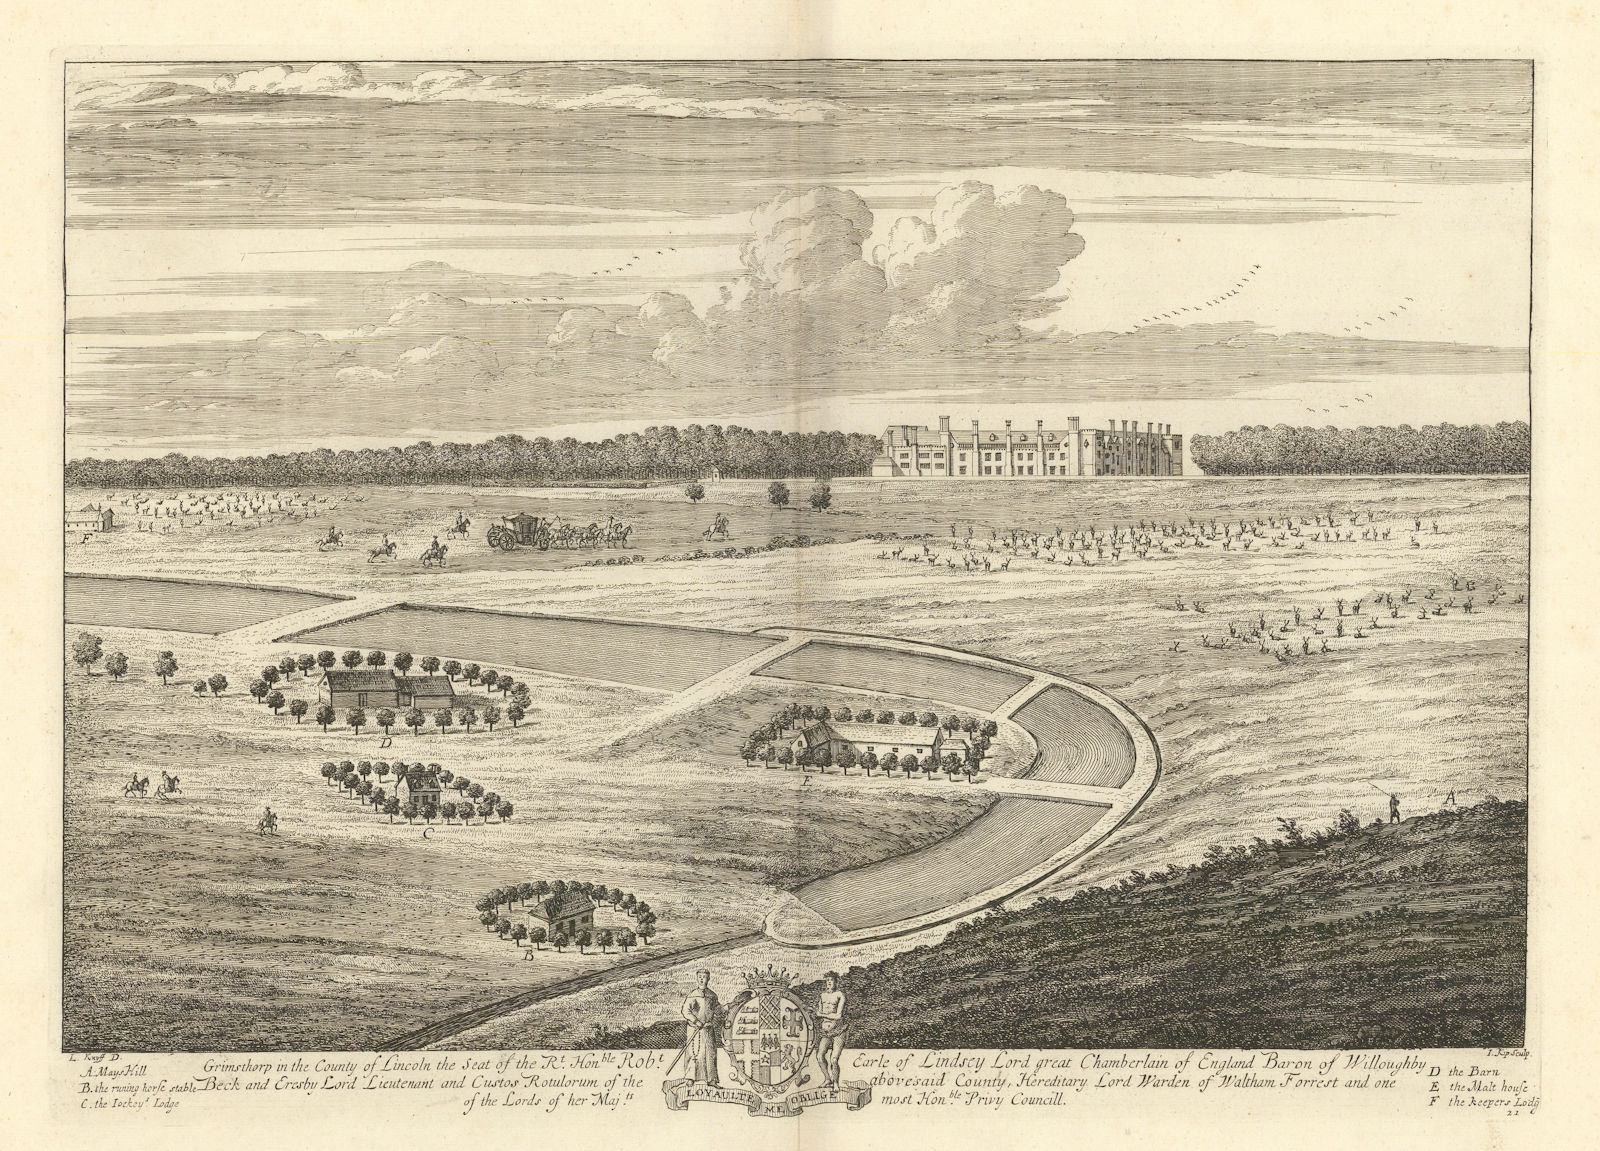 Grimsthorpe Castle by Kip/Knyff Pl.21 "Grimsthorp in the County of Lincoln" 1709